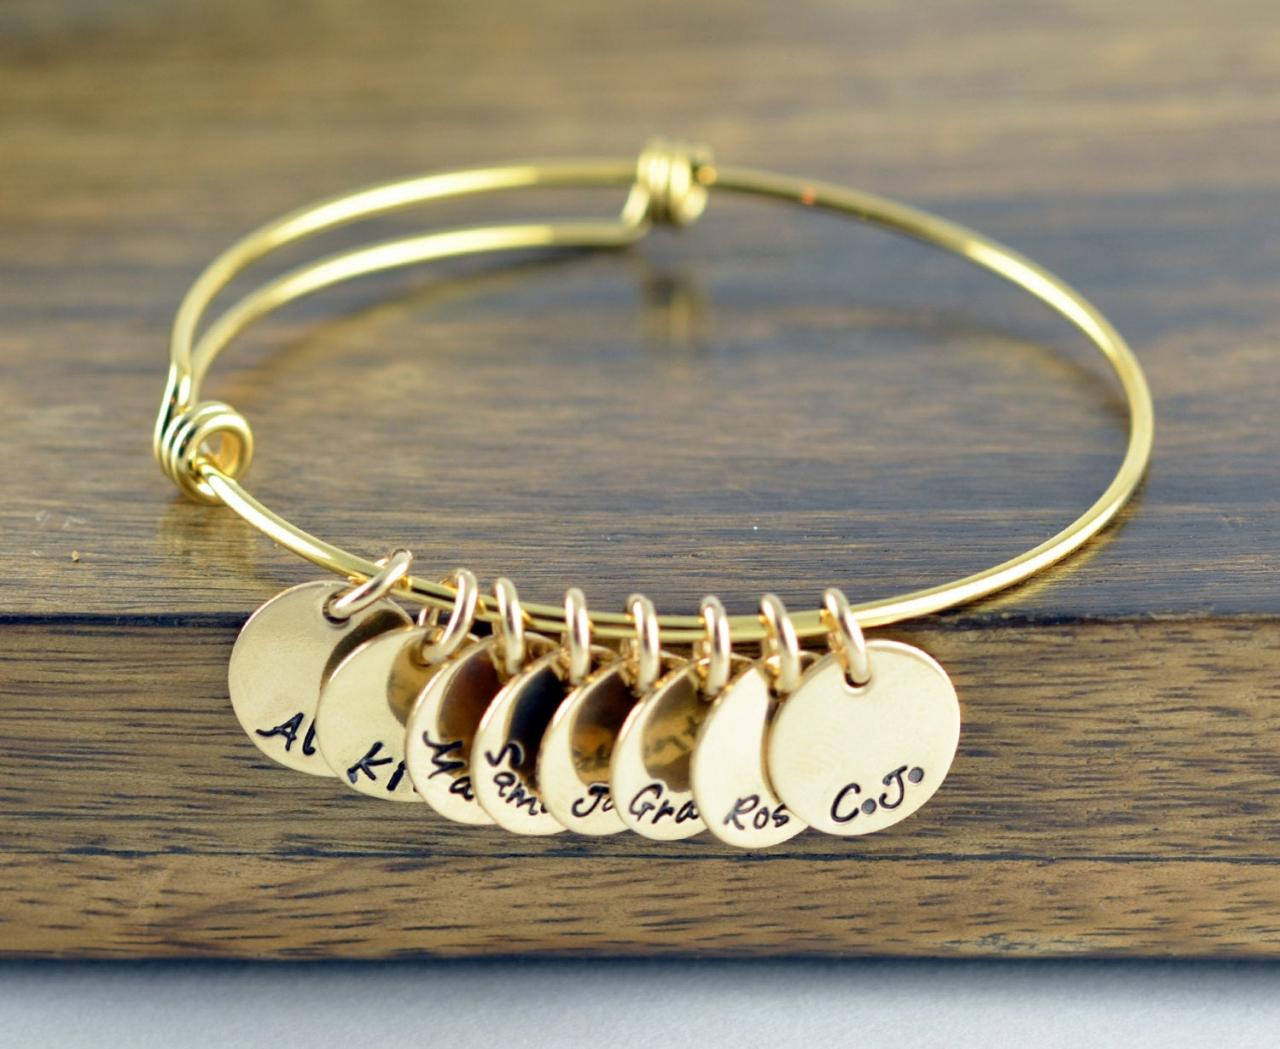 Hand Stamped Bangle Bracelet - Mothers Jewelry - Mother Bracelet - Grandmother Gift - Gold Bangle Bracelet - Name Bracelet - Mother's Gift